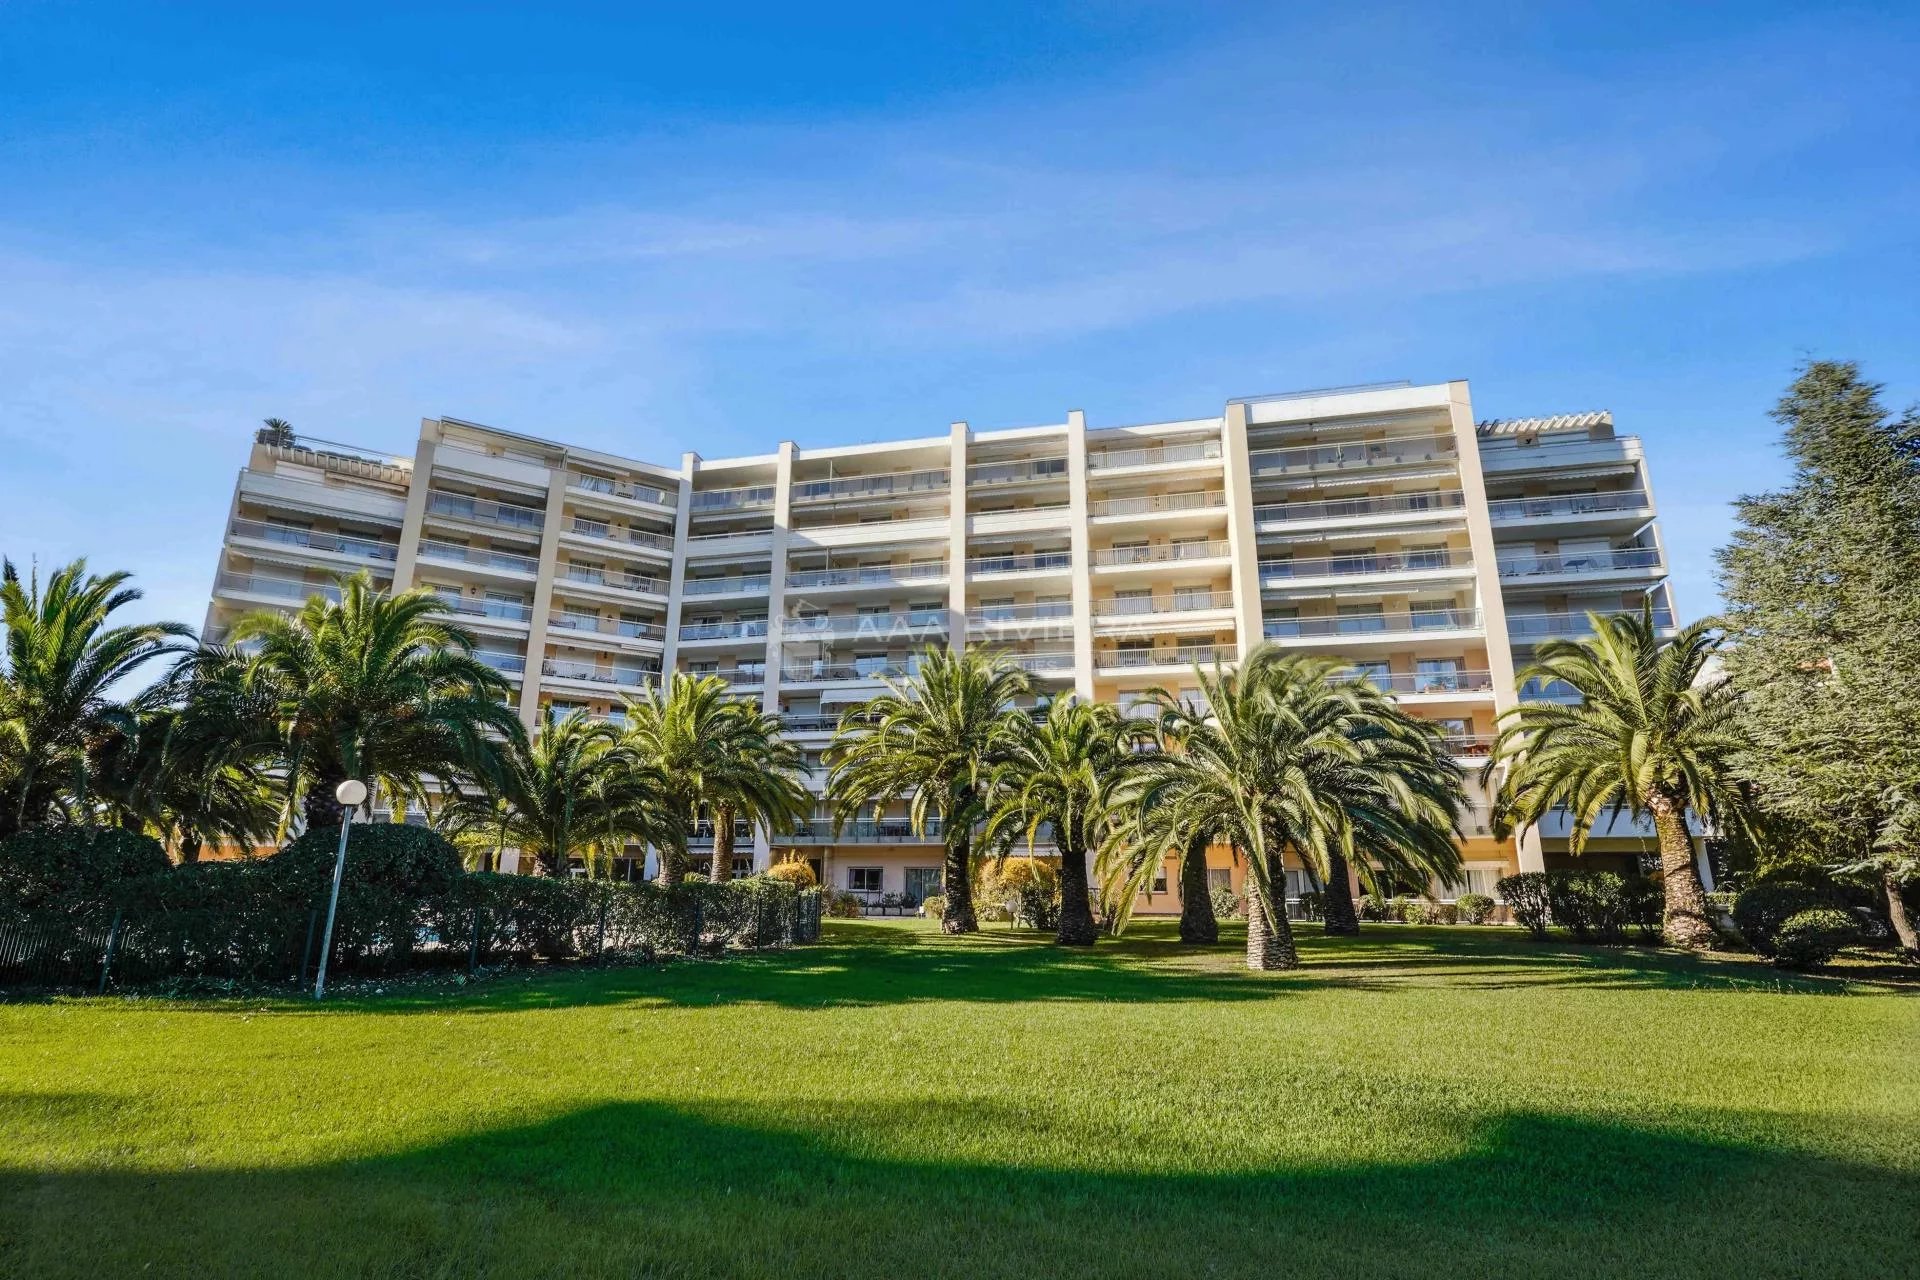 MANDELIEU CLOSE TO CANNES – SOLE AGENT – Superb penthouse with sea view and parking in residence with pool, park, tennis og reception.